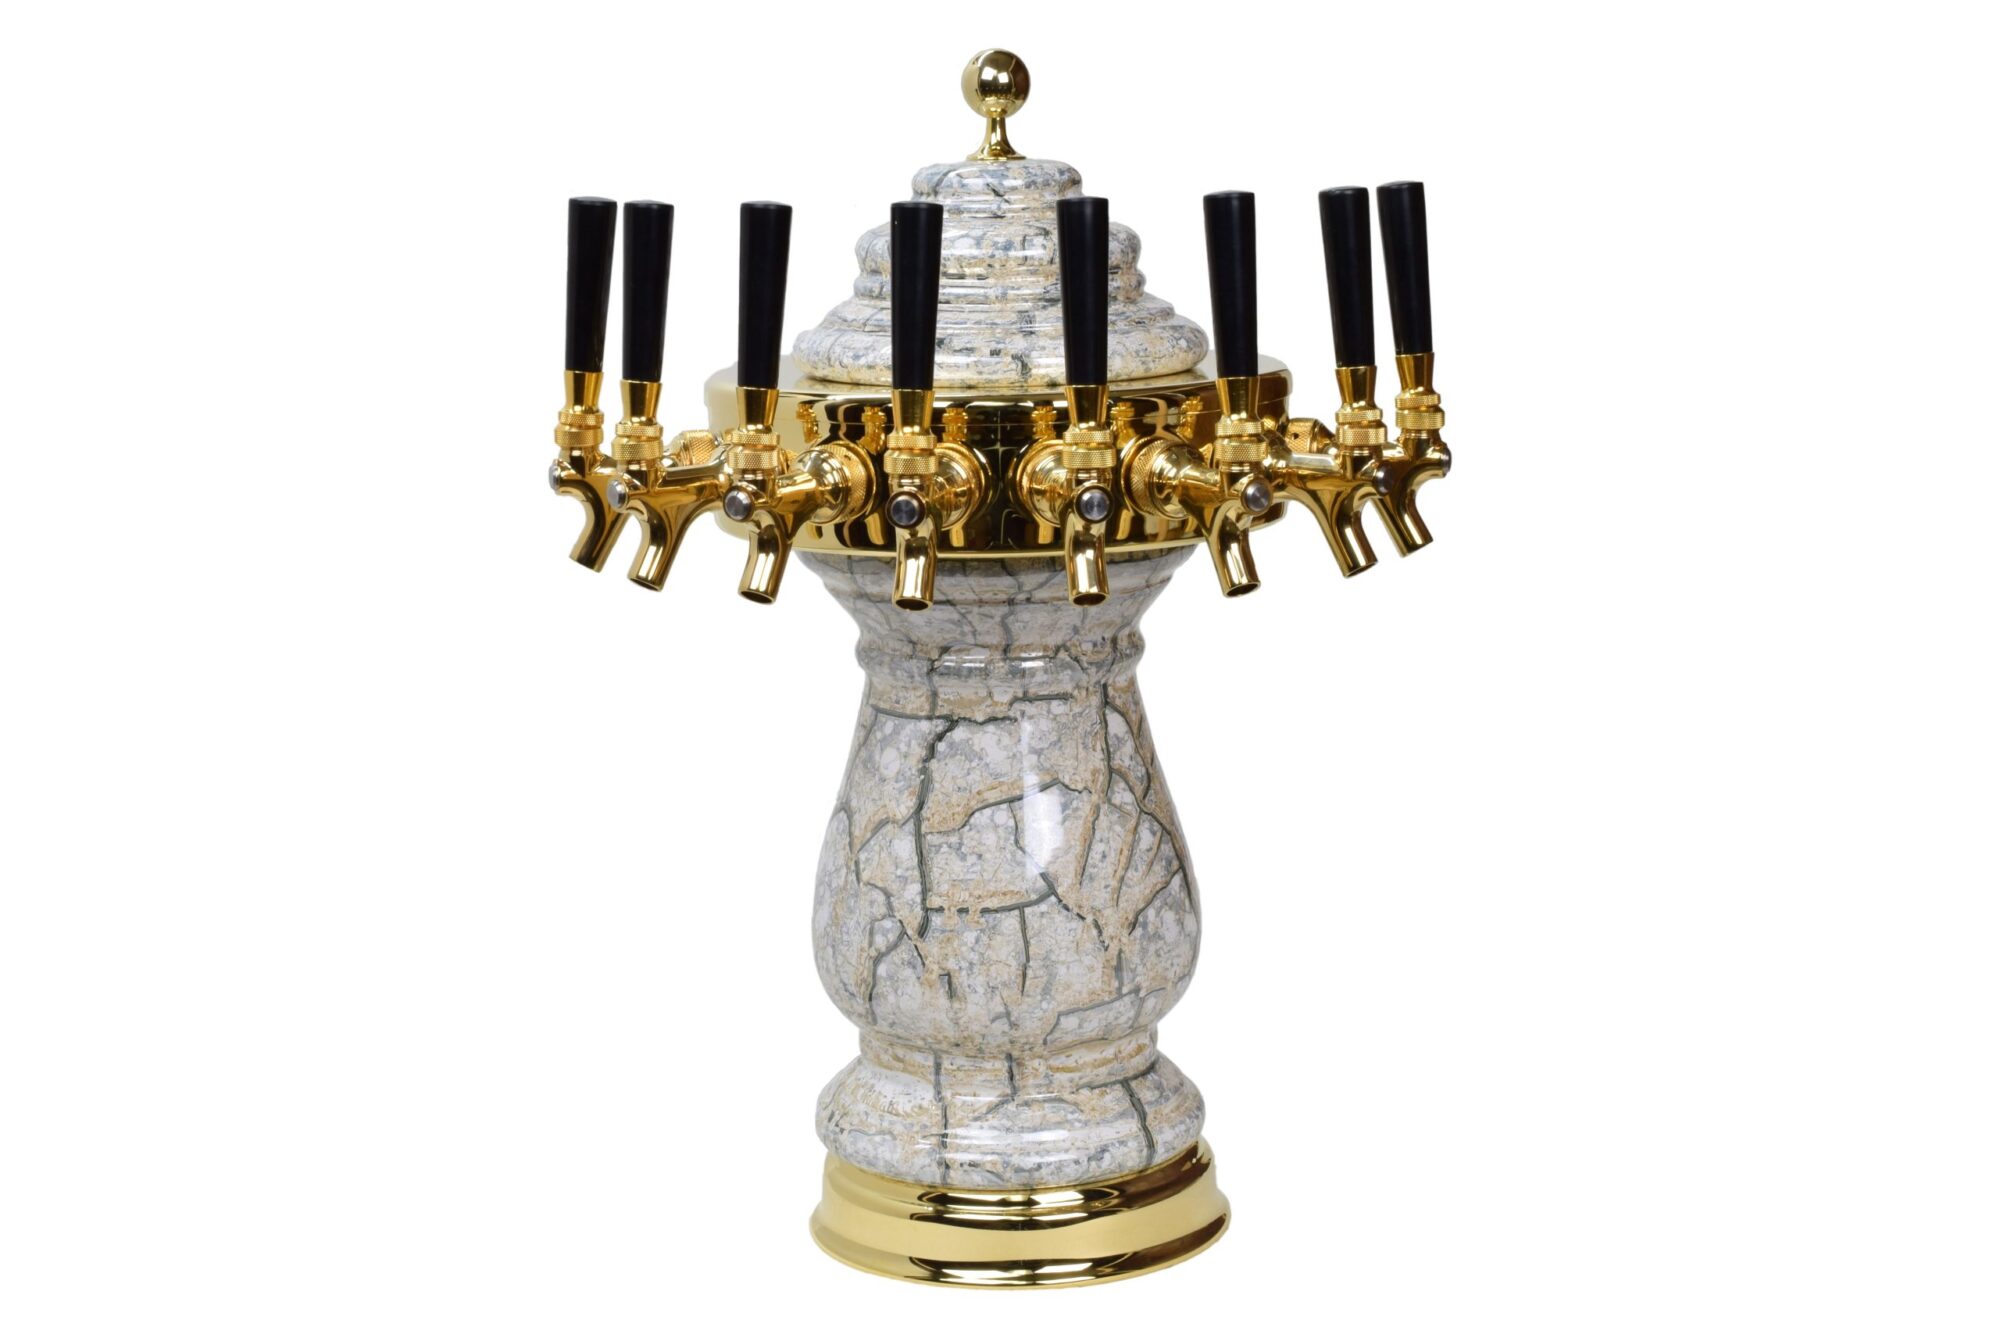 884B-8 -- Eight Faucet Ceramic Tower with PVD Gold Hardware and Faucets - Shown in Beige Marble